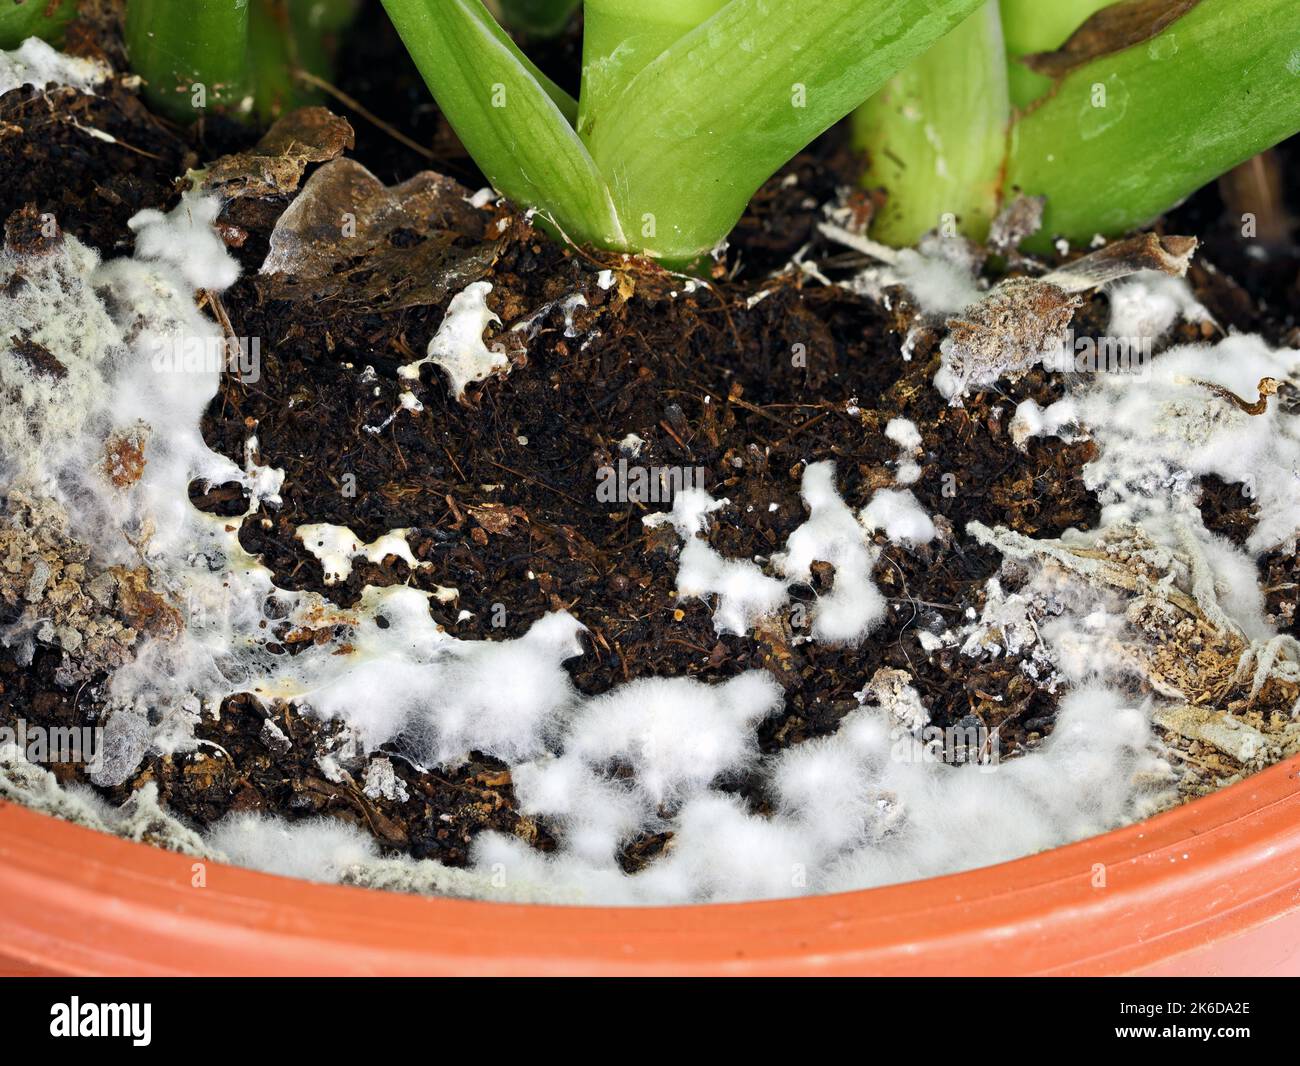 close up of white mold growing on soil in the flower pot, excessive watering and damp soil encourage mold growth Stock Photo